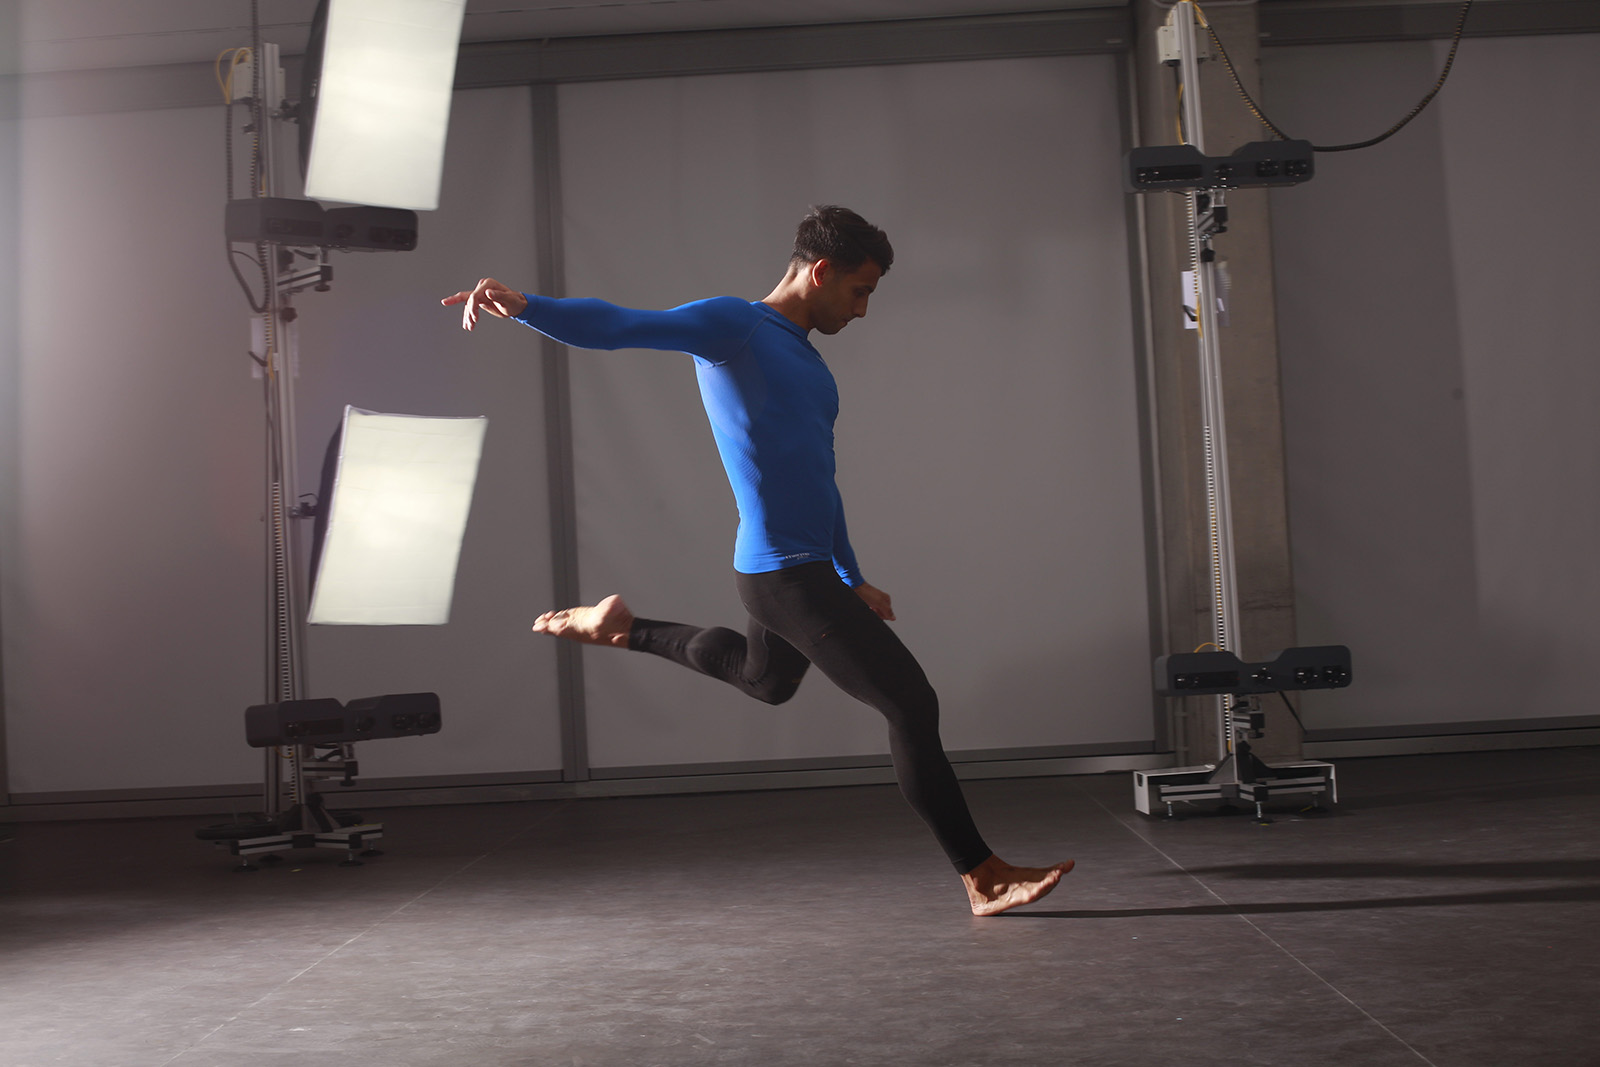 A sportman kicking in the studio for a Move 4D scan